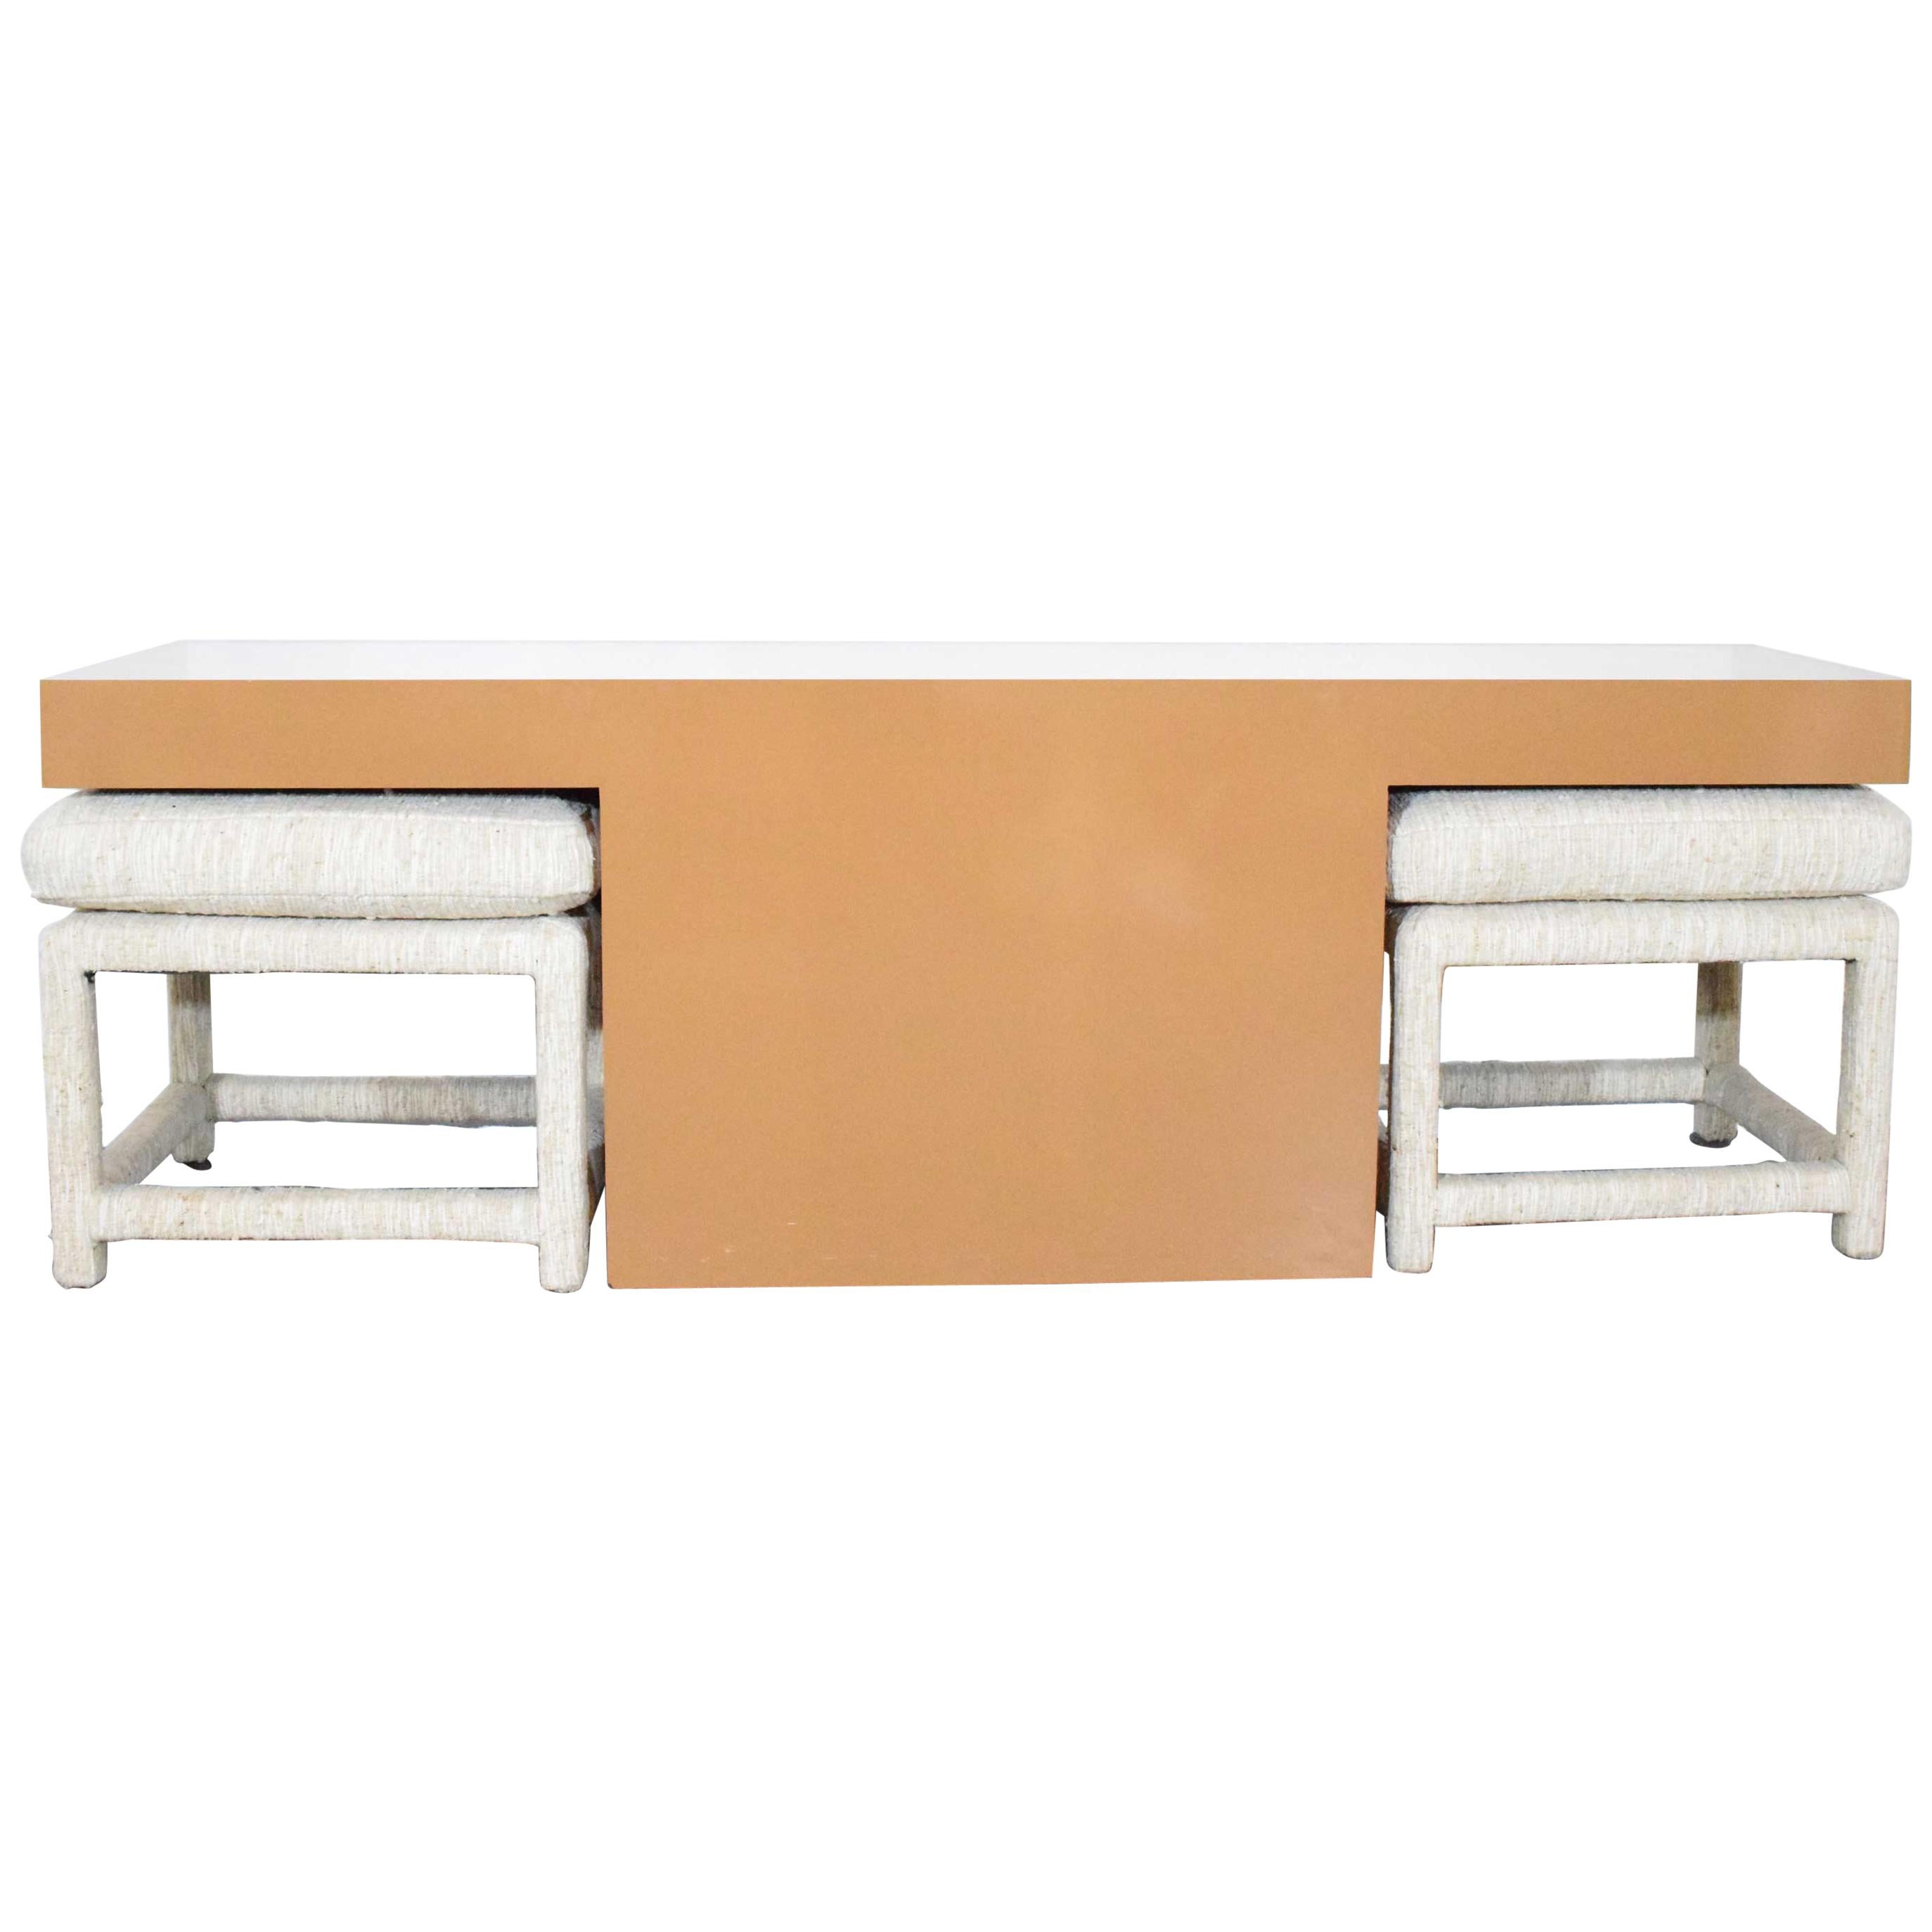 Milo Baughman for Thayer Coggin Console Table with Benches